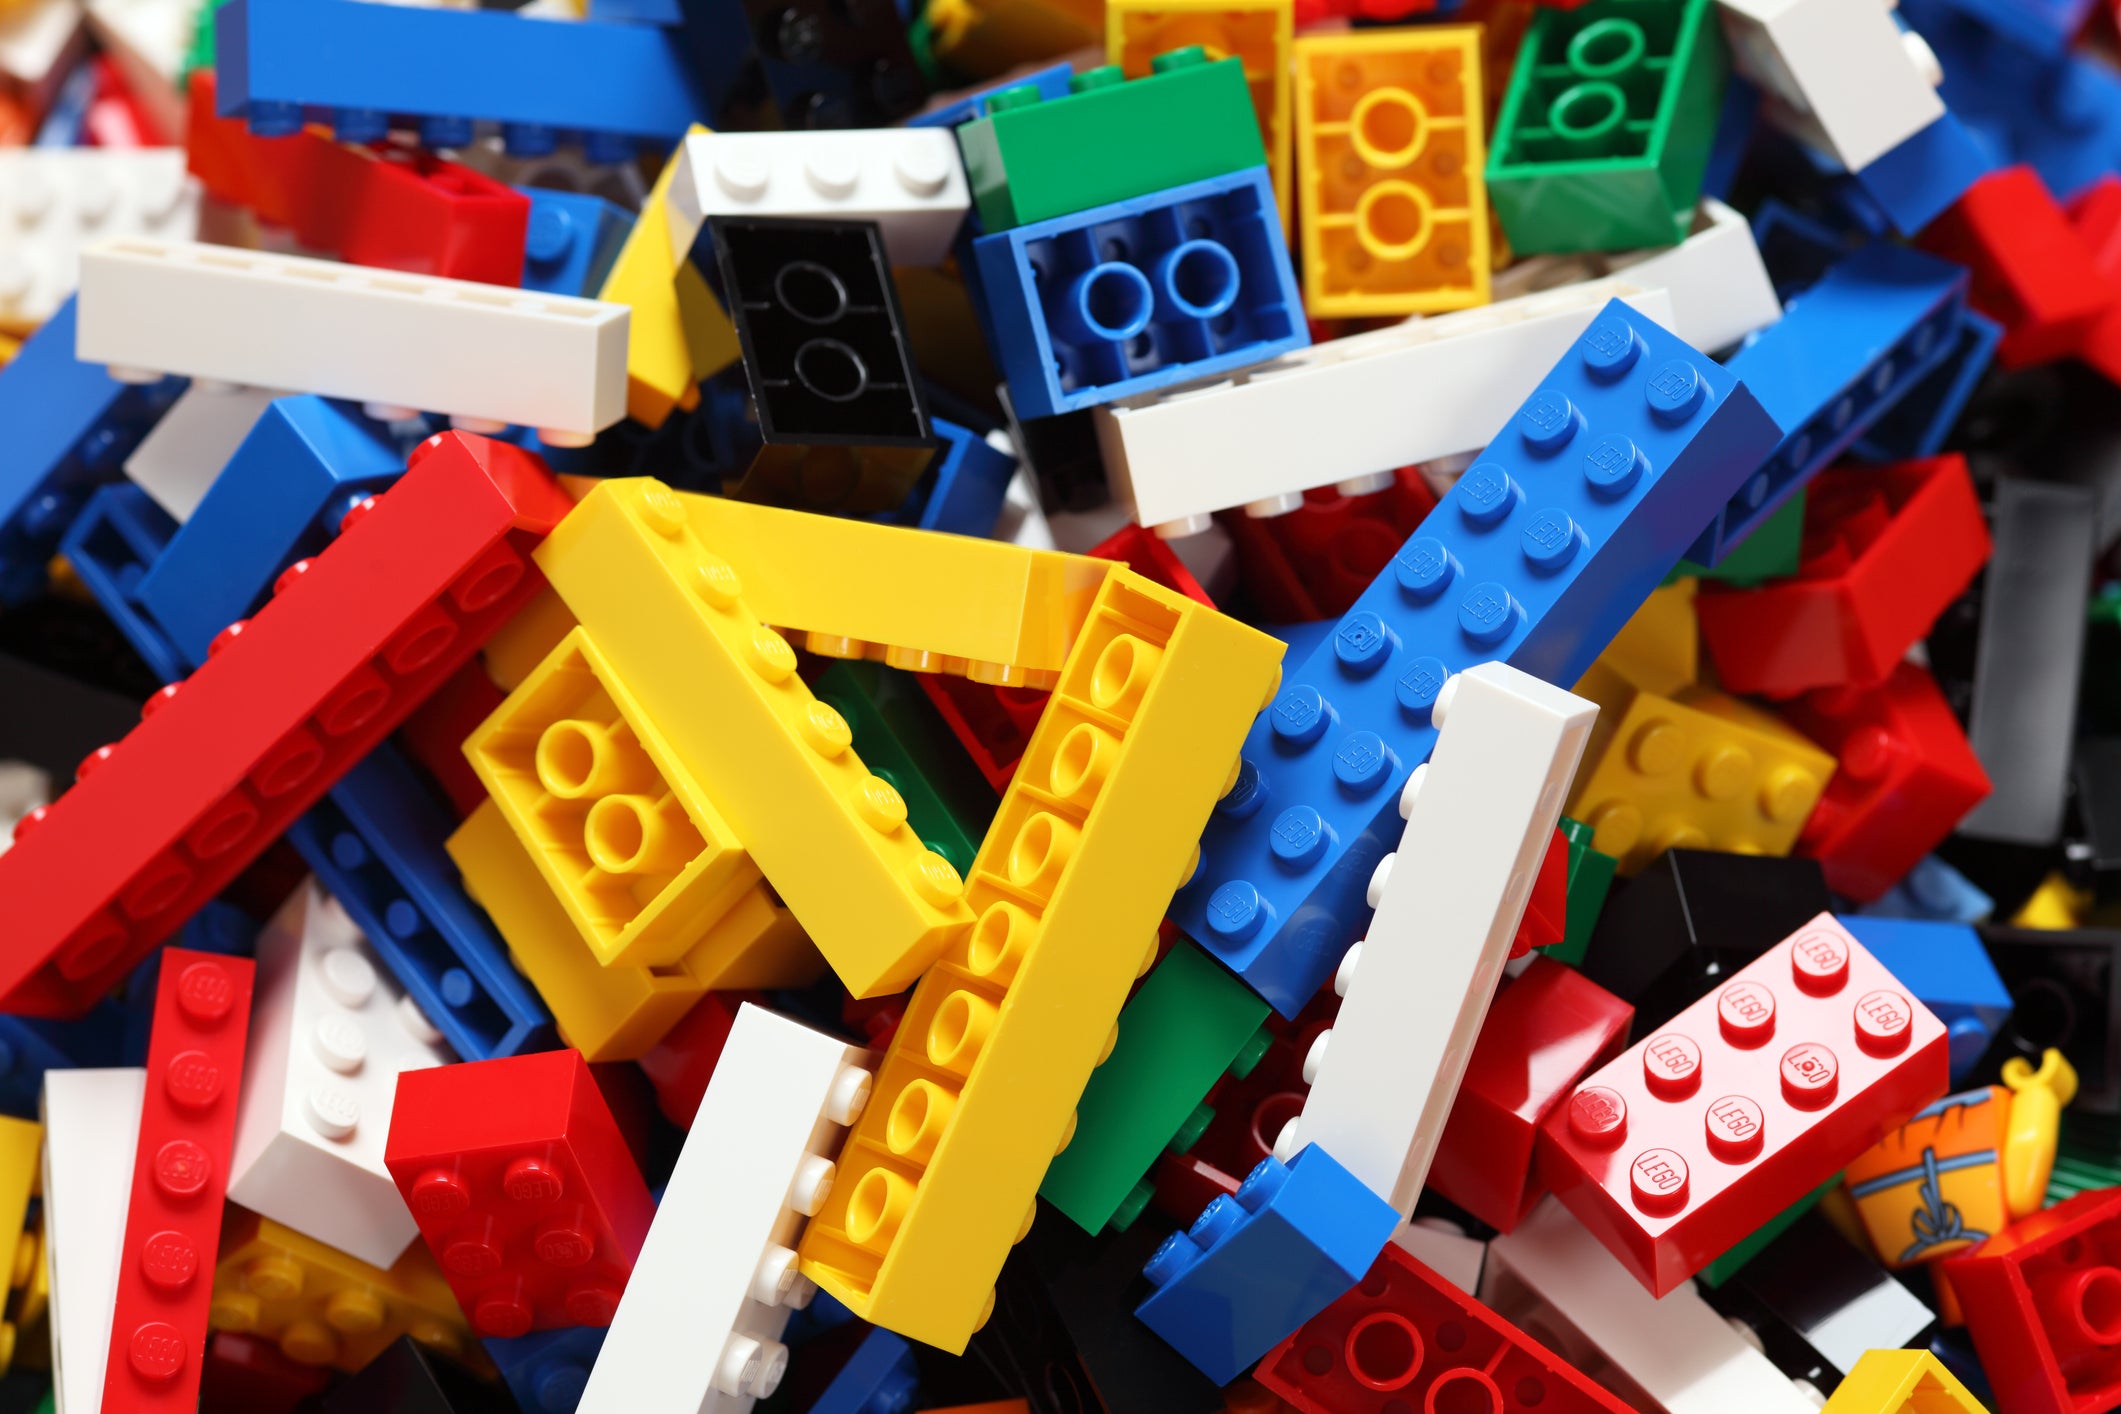 Lego is among the activities being offered at Cambridge University libraries to help stressed students